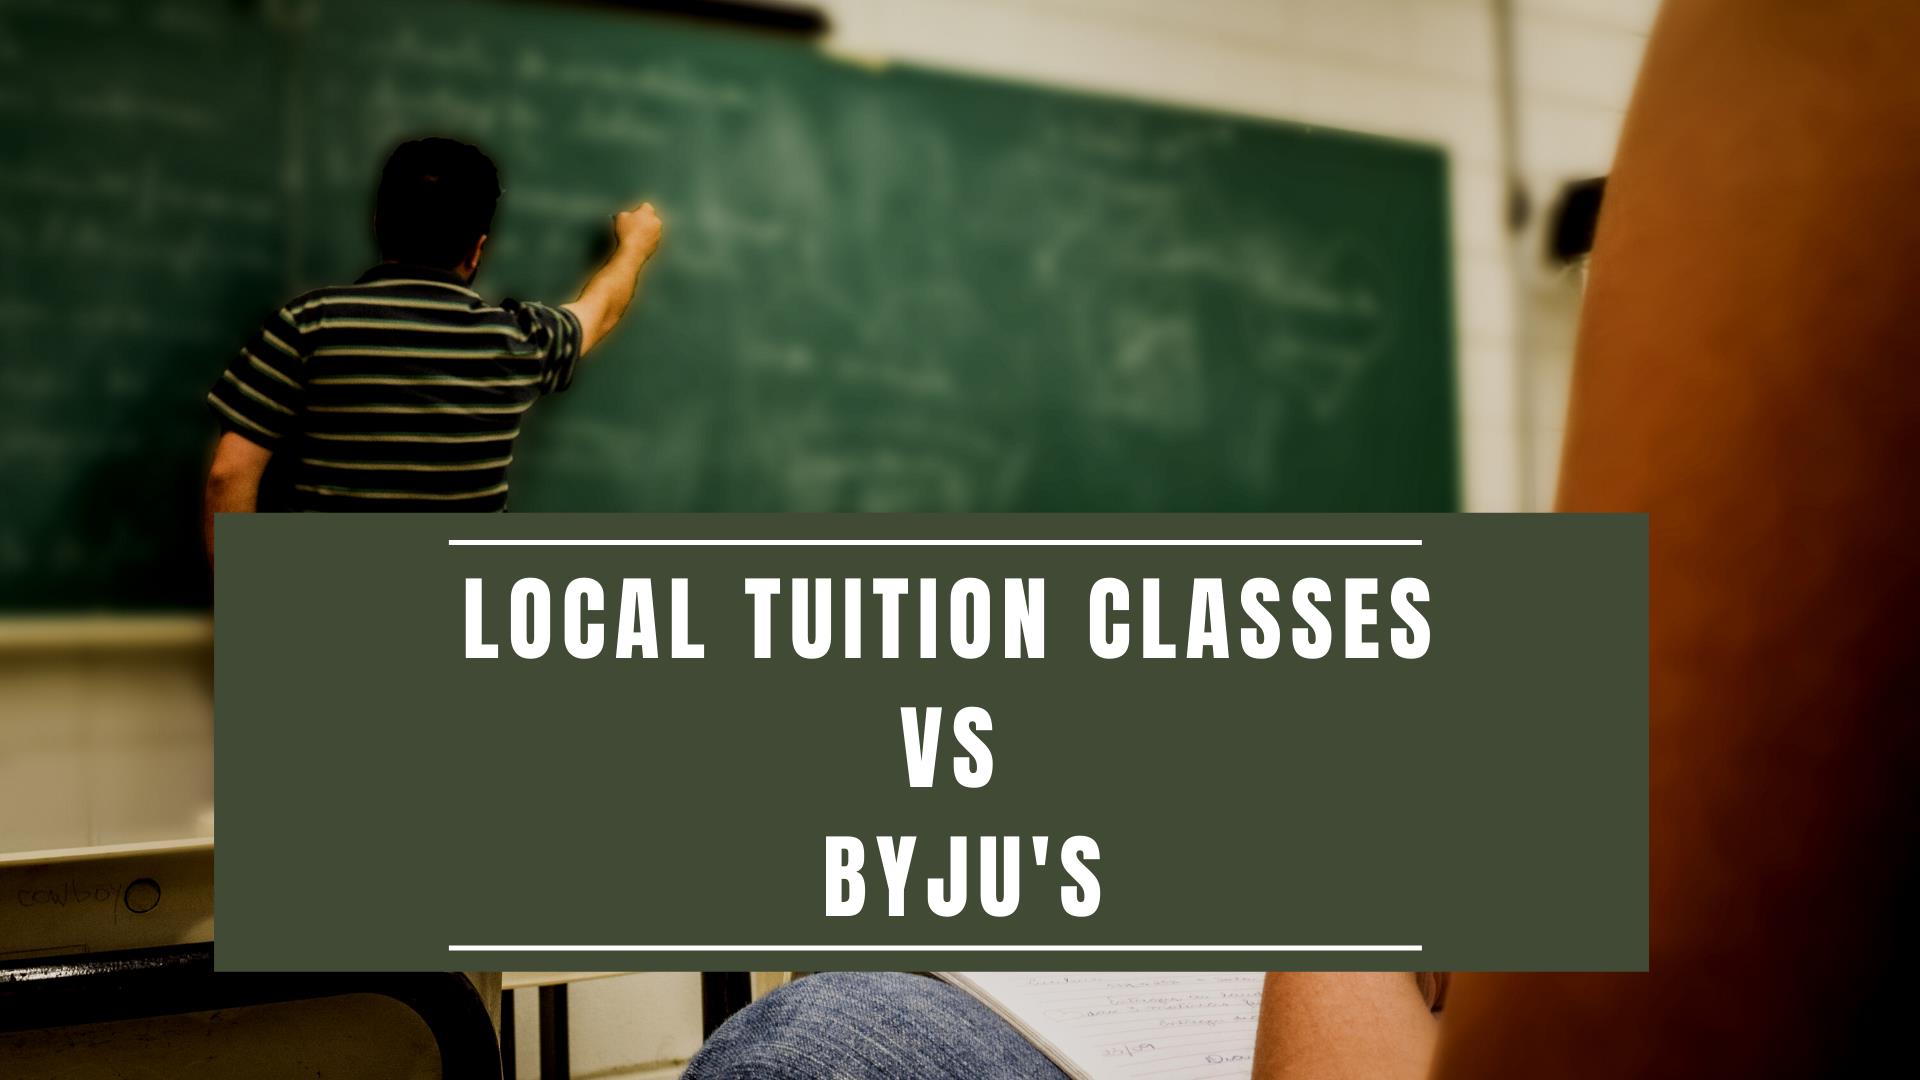 Local Tuition Classes Vs Byju's: How Local Tuition Classes Can Compete with Byju's